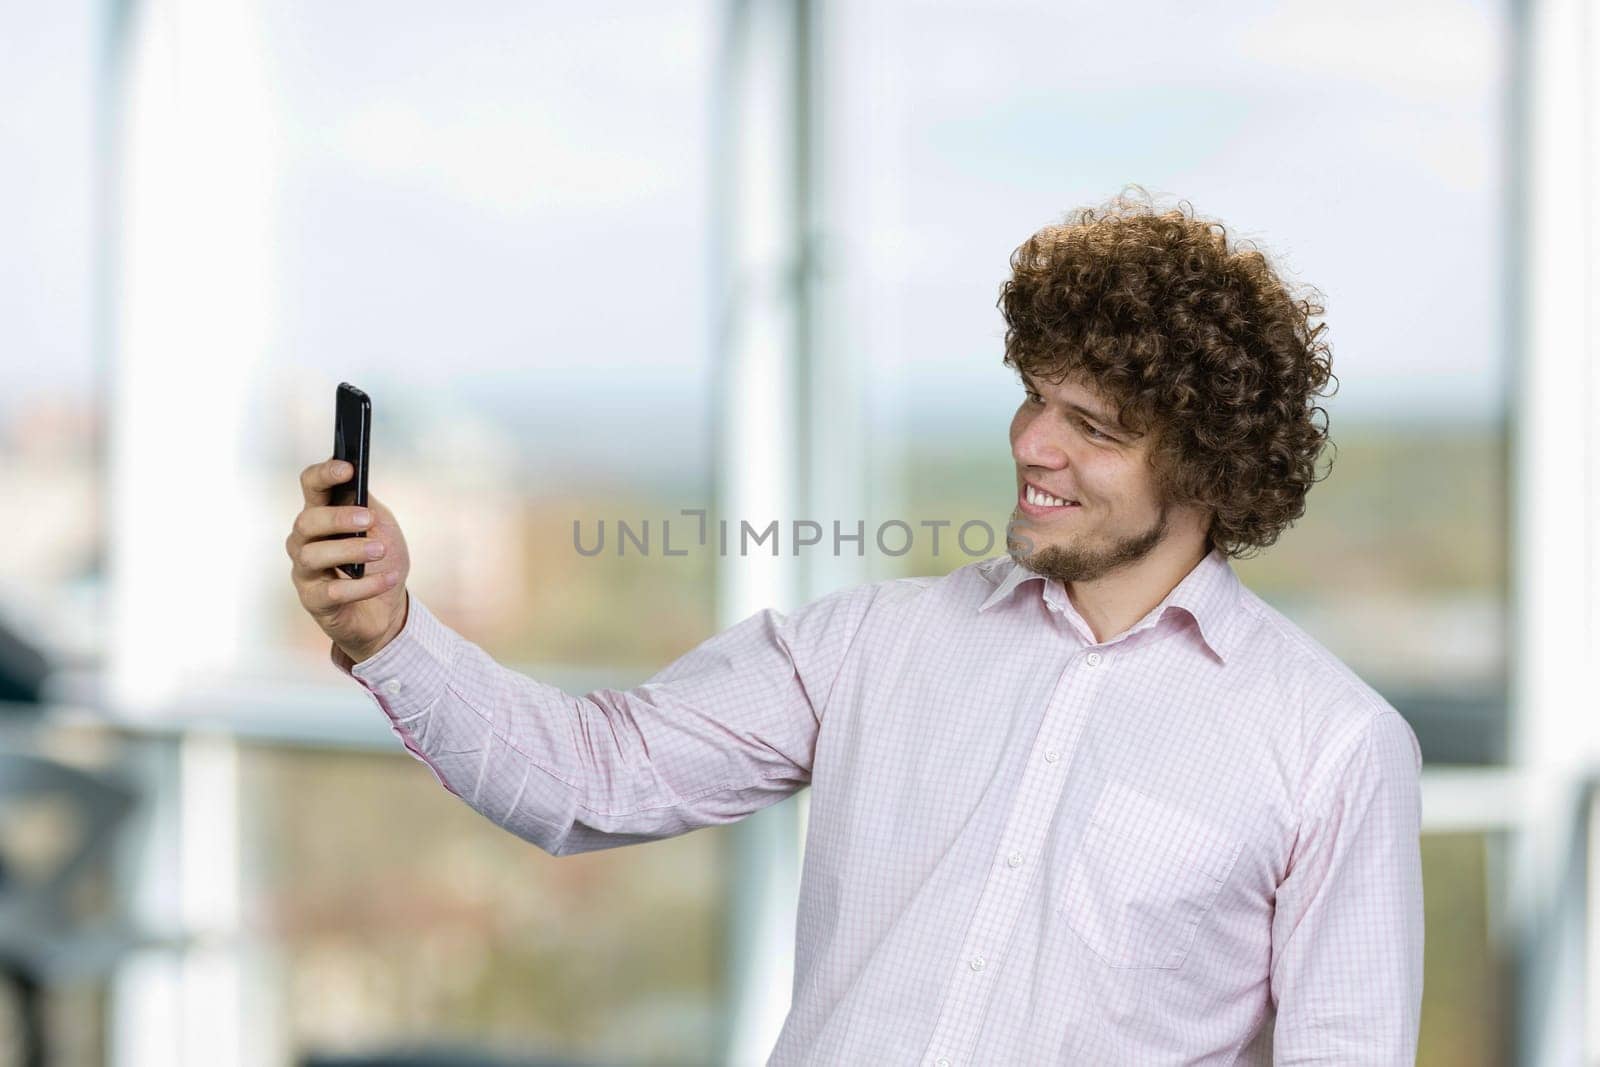 Portrait of happy young man with curly hair taking selfie with smartphone. Indoor window in the background.